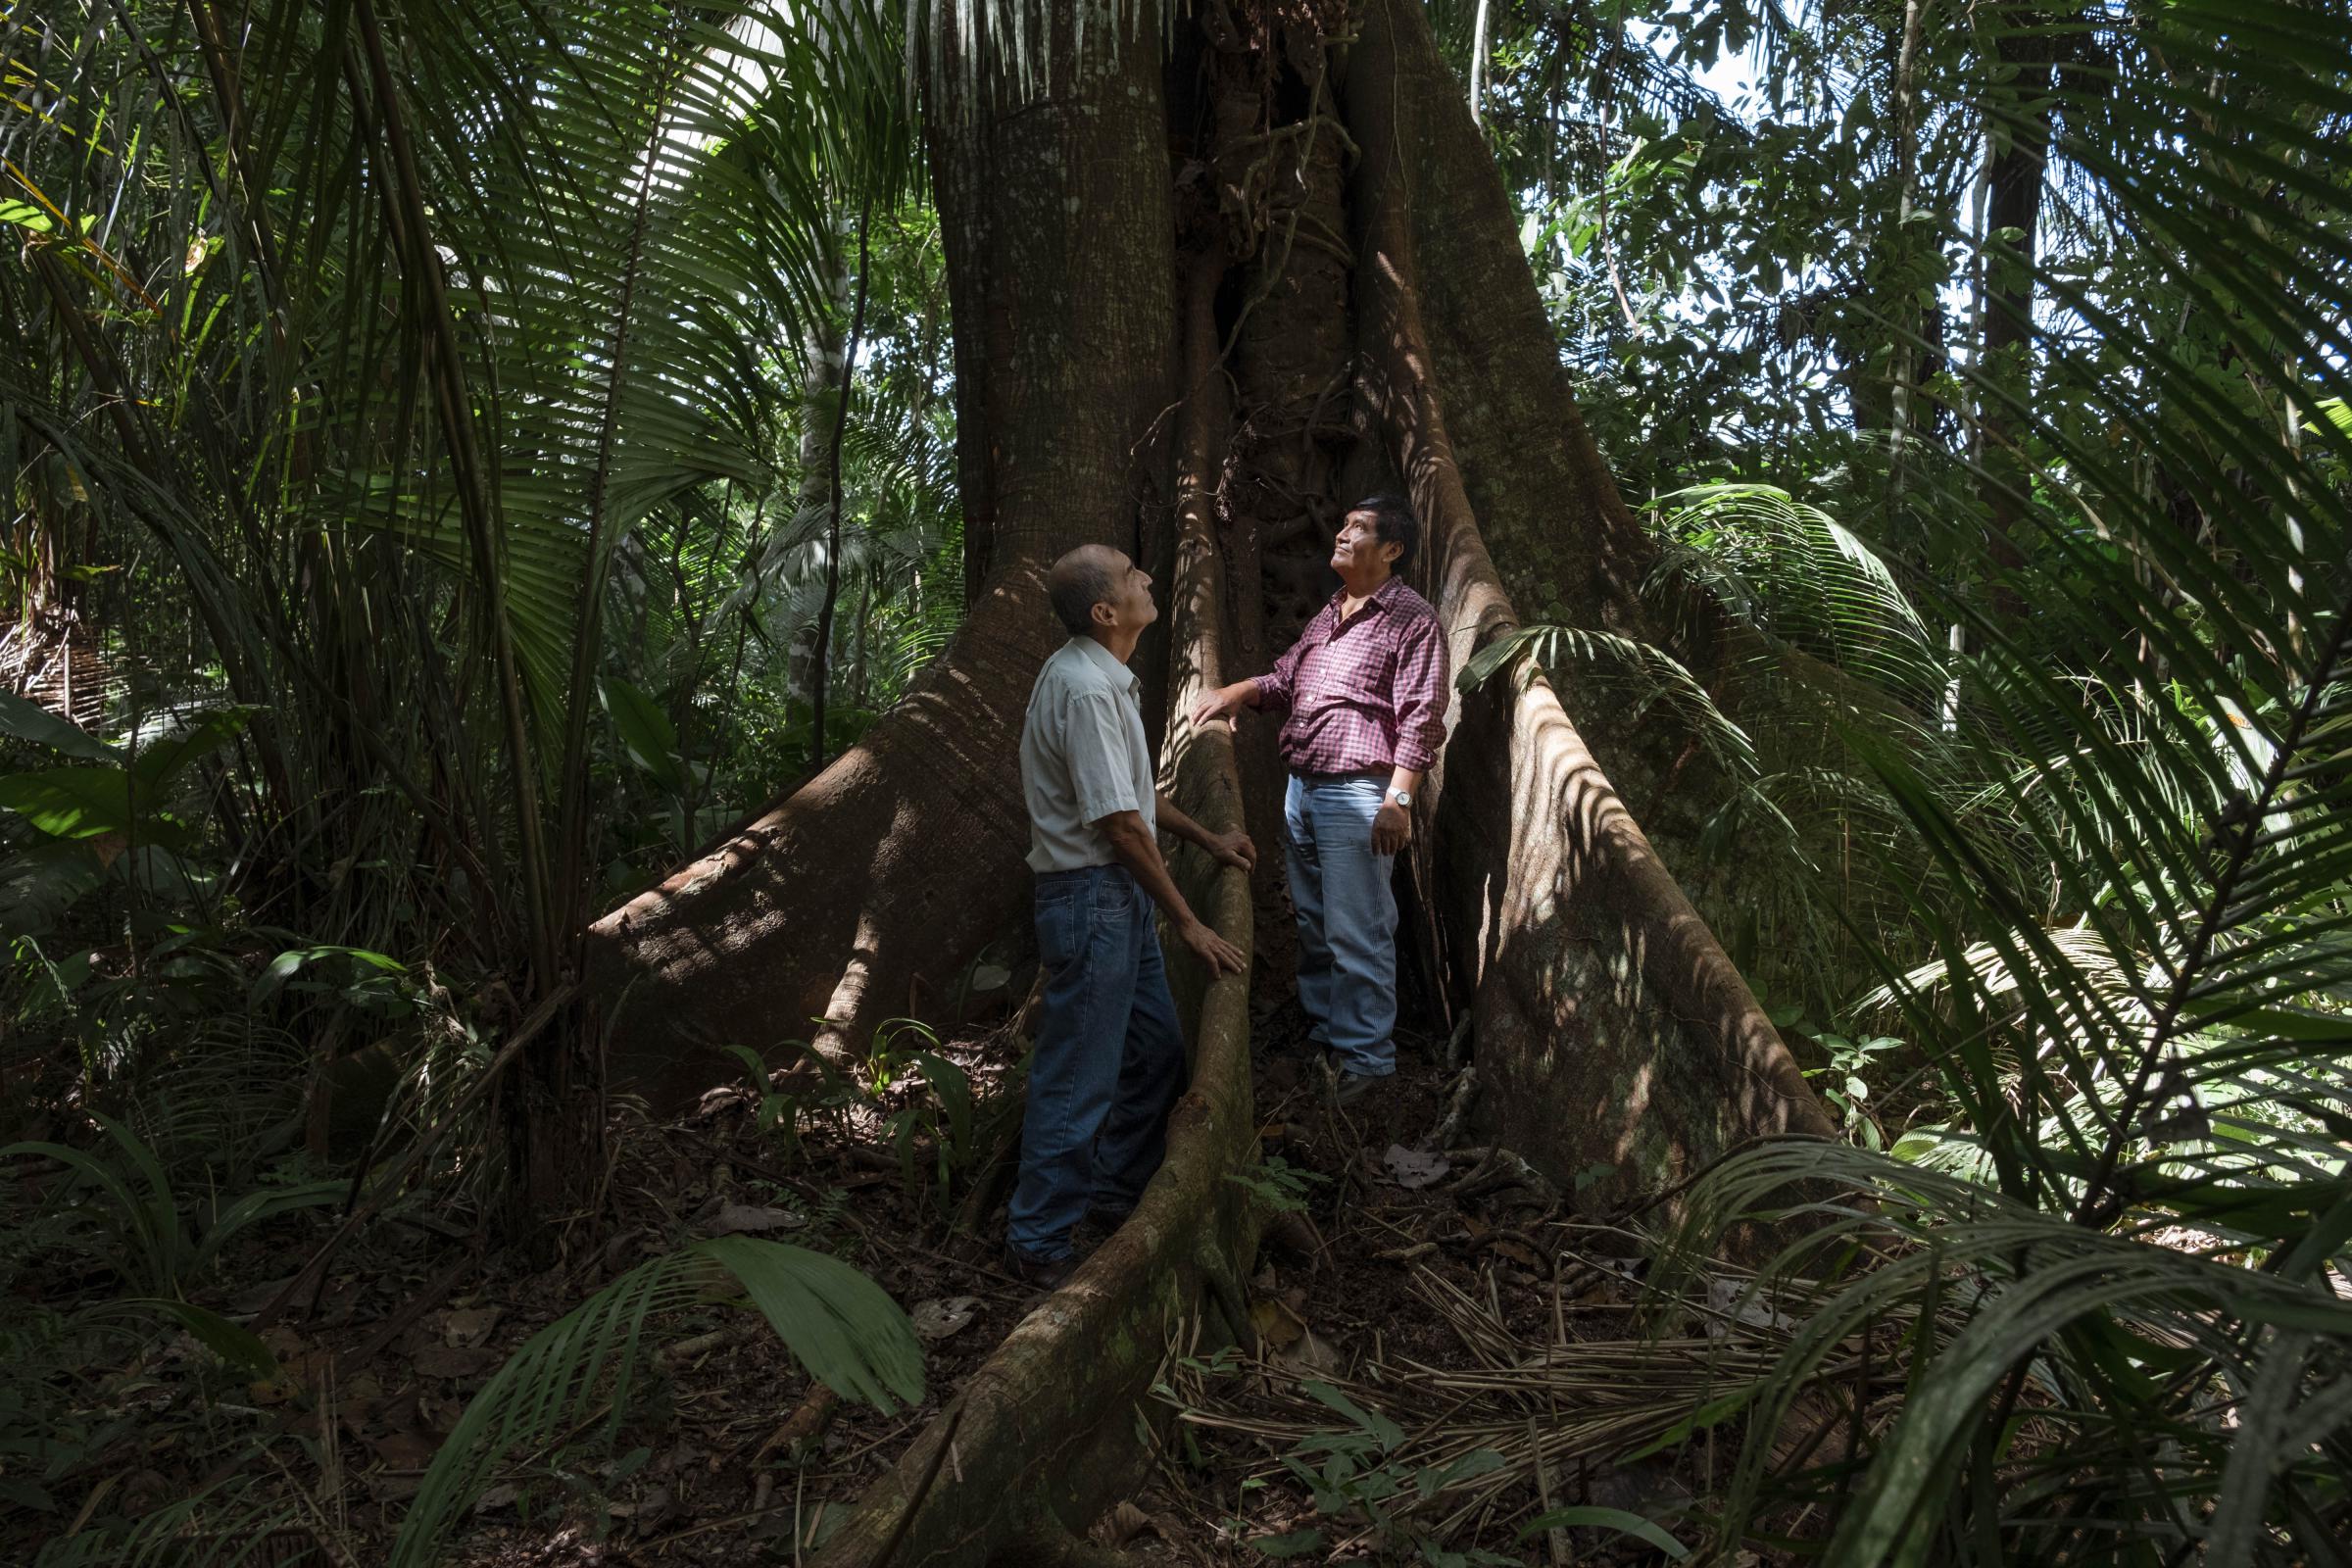 Paradise lost: Inside Peru's emergency zone for NBC News - Portrait of Victor Zambrano and Demetro Pacheco with an Oj&eacute; tree also known as Ficus...